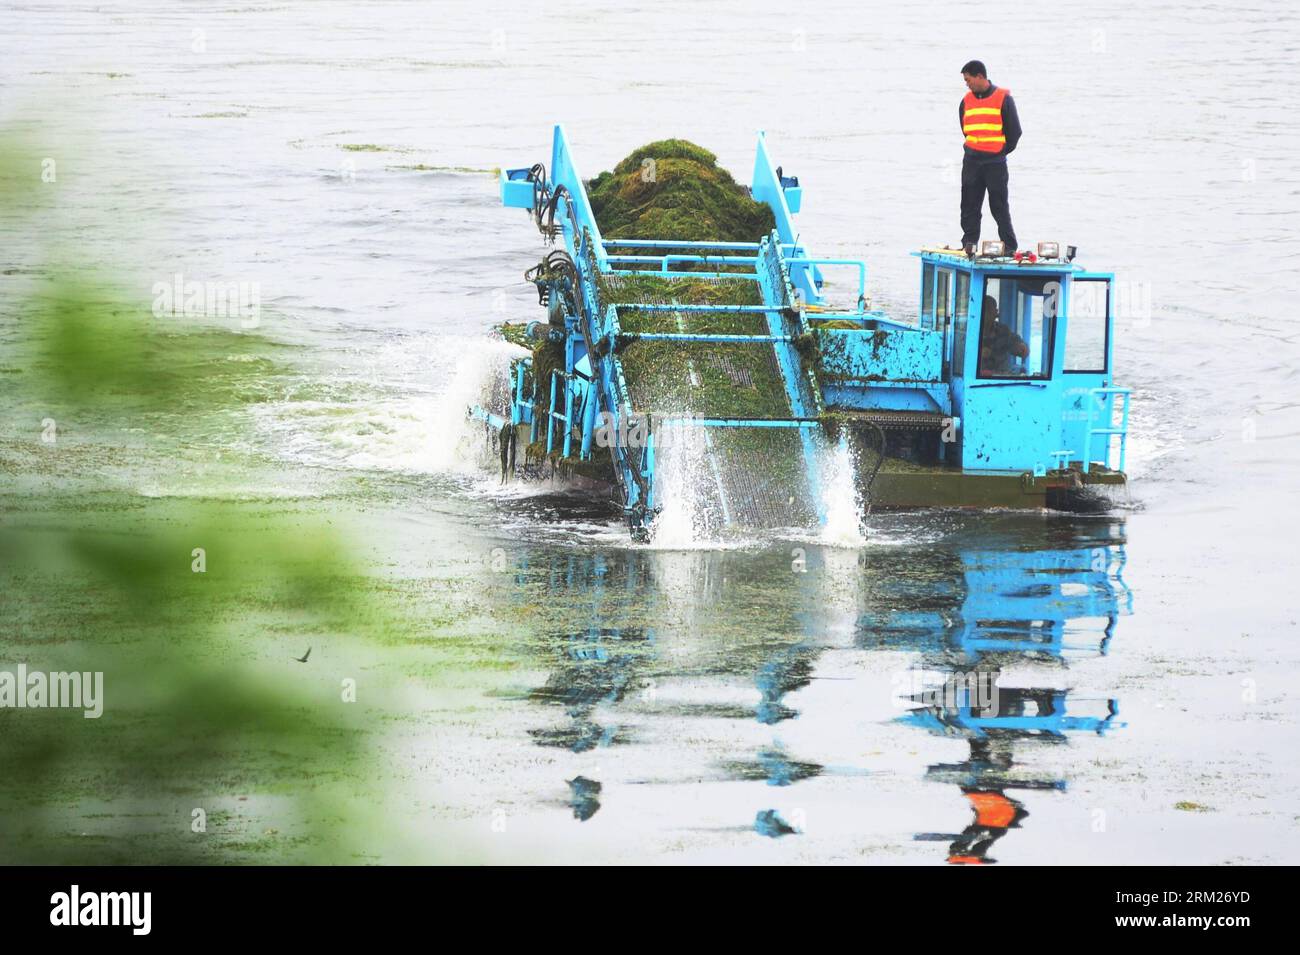 Bildnummer: 59720296  Datum: 28.05.2013  Copyright: imago/Xinhua Members of the local water authority clear overgrown waterweeds with a machine to improve the environment of the Haihe River in Tianjin Municipality, north China, May 28, 2013. (Xinhua/Wang Xiaoming) (wqq) CHINA-TIANJIN-HAIHE RIVER-WATERWEEDS (CN) PUBLICATIONxNOTxINxCHN Gesellschaft x2x xkg 2013 quer Aufmacher o0 Ökologie Wasser, Algen Algenpest     59720296 Date 28 05 2013 Copyright Imago XINHUA Members of The Local Water Authority Clear overgrown Waterweeds With a Machine to Improve The Environment of The Haihe River in Tianjin Stock Photo